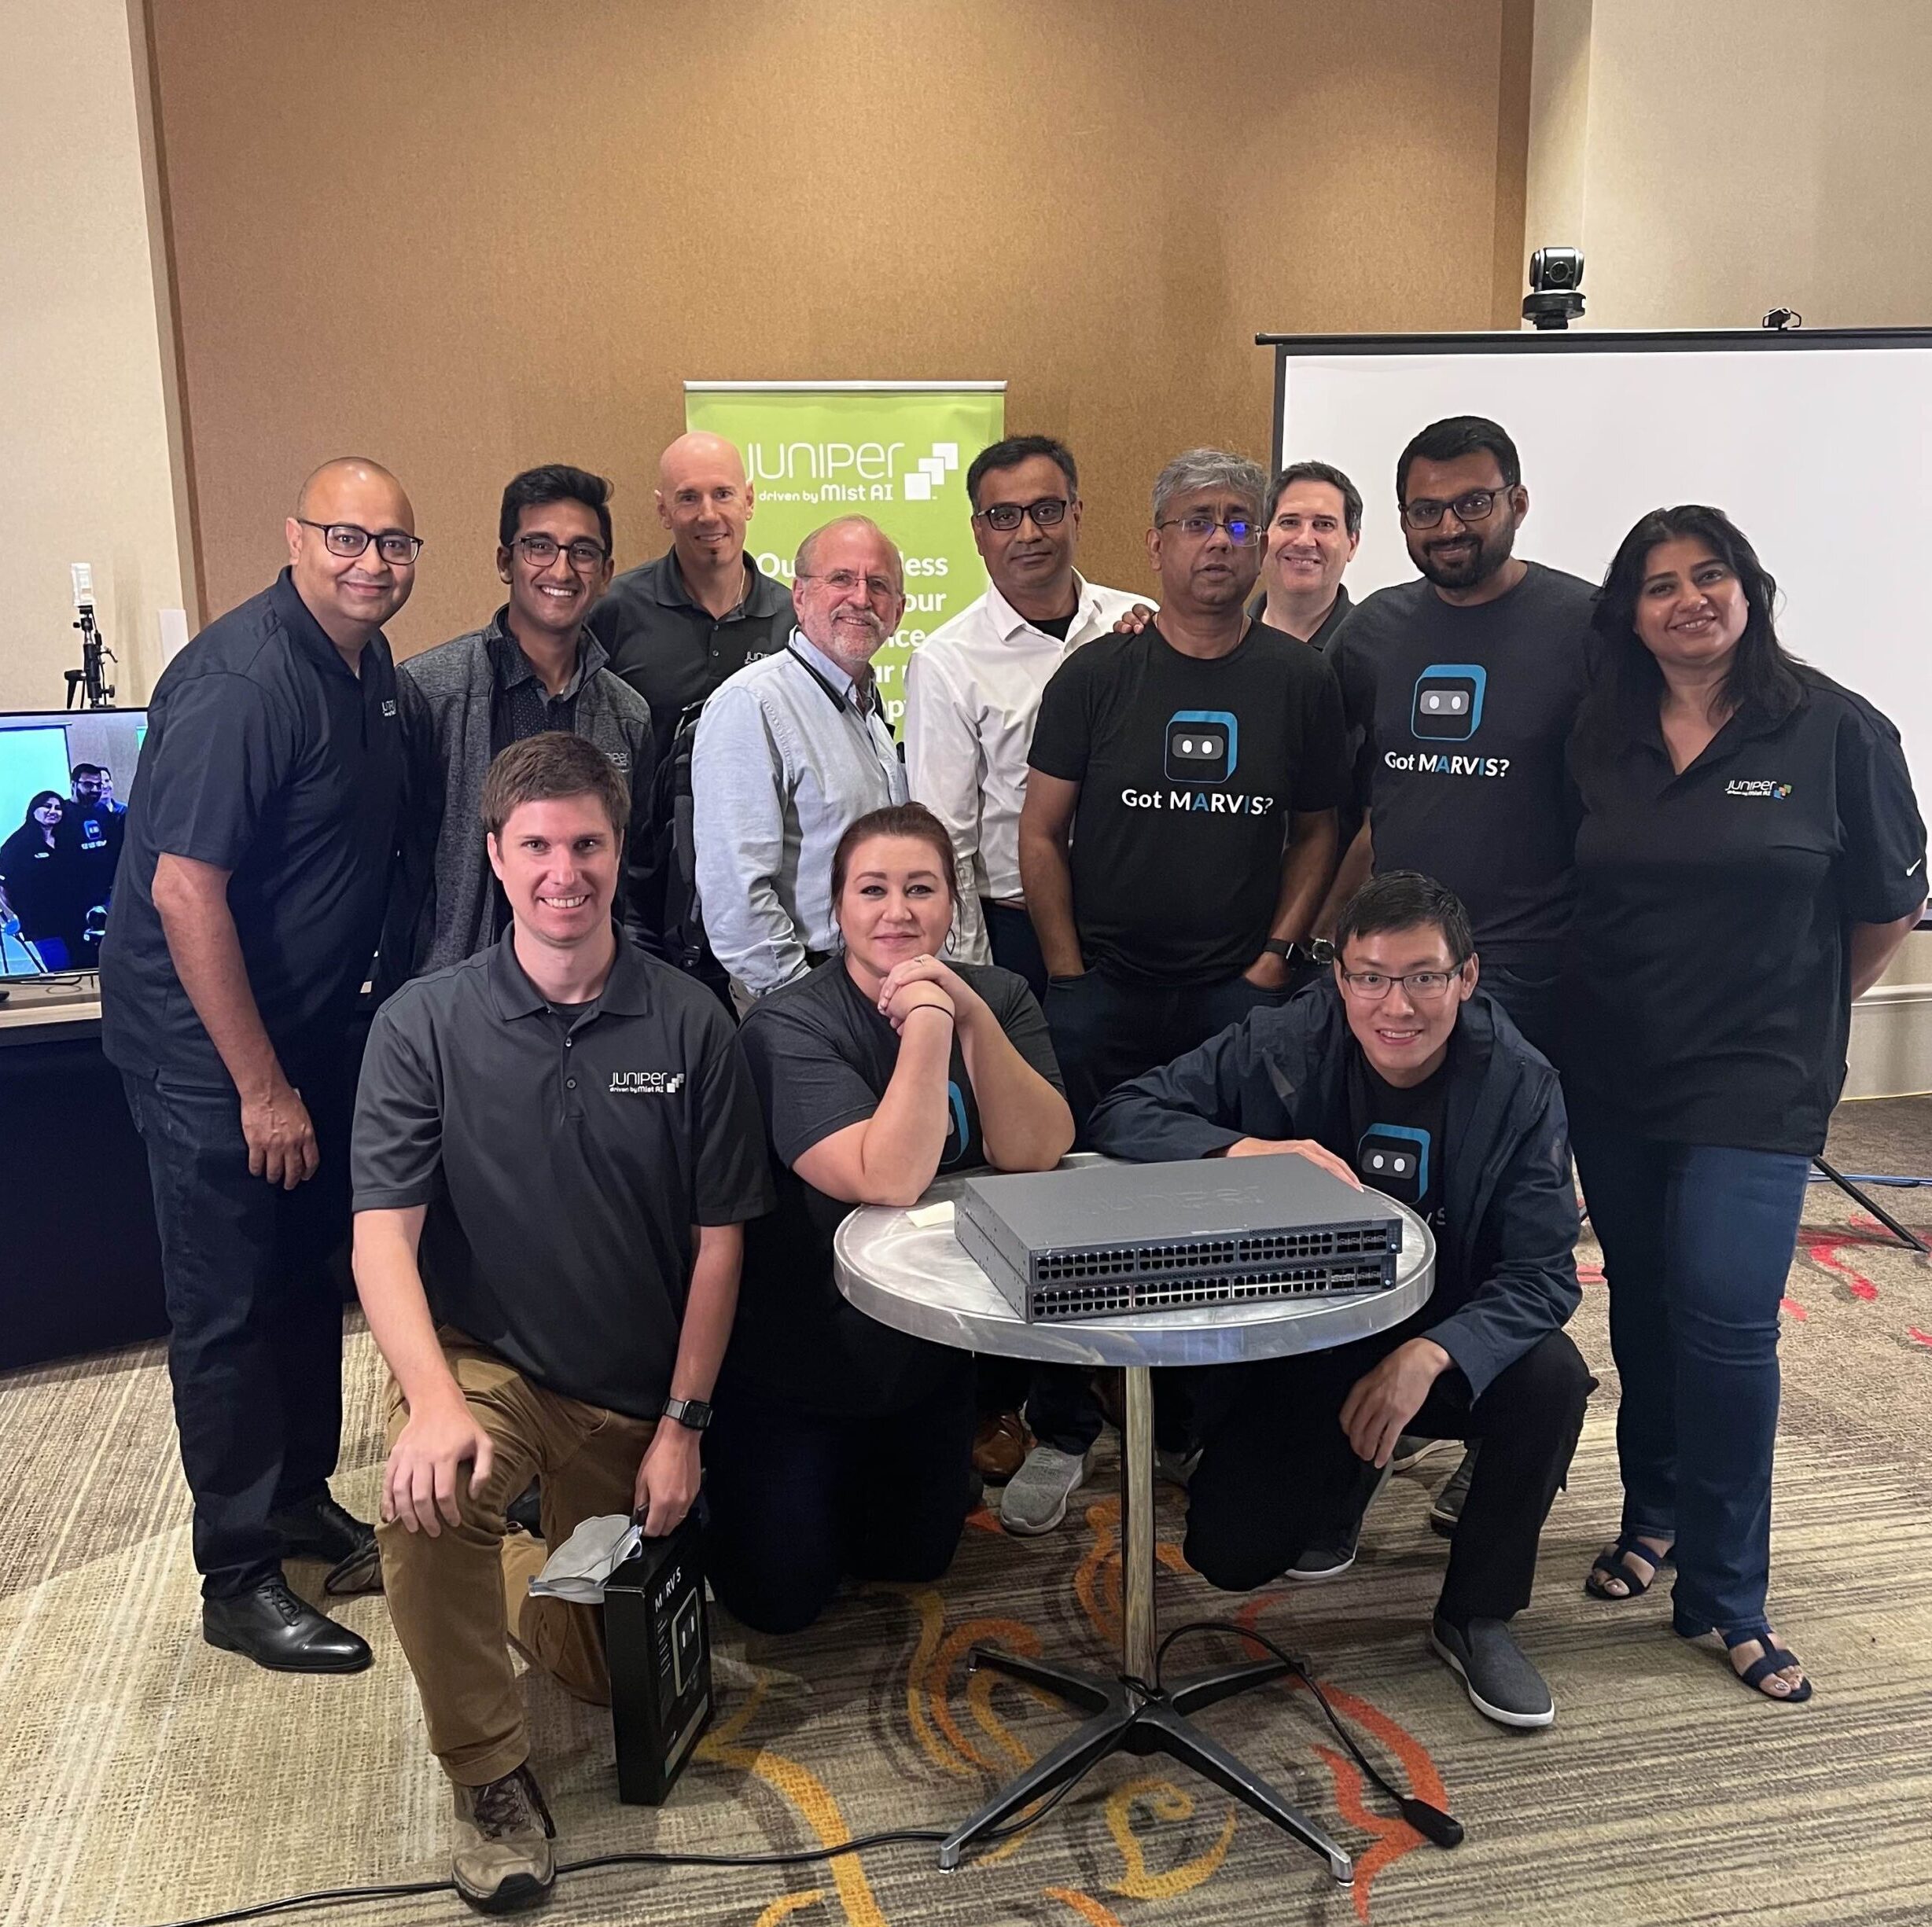 Juniper Networks Presents at Cloud Field Day 18 - Tech Field Day